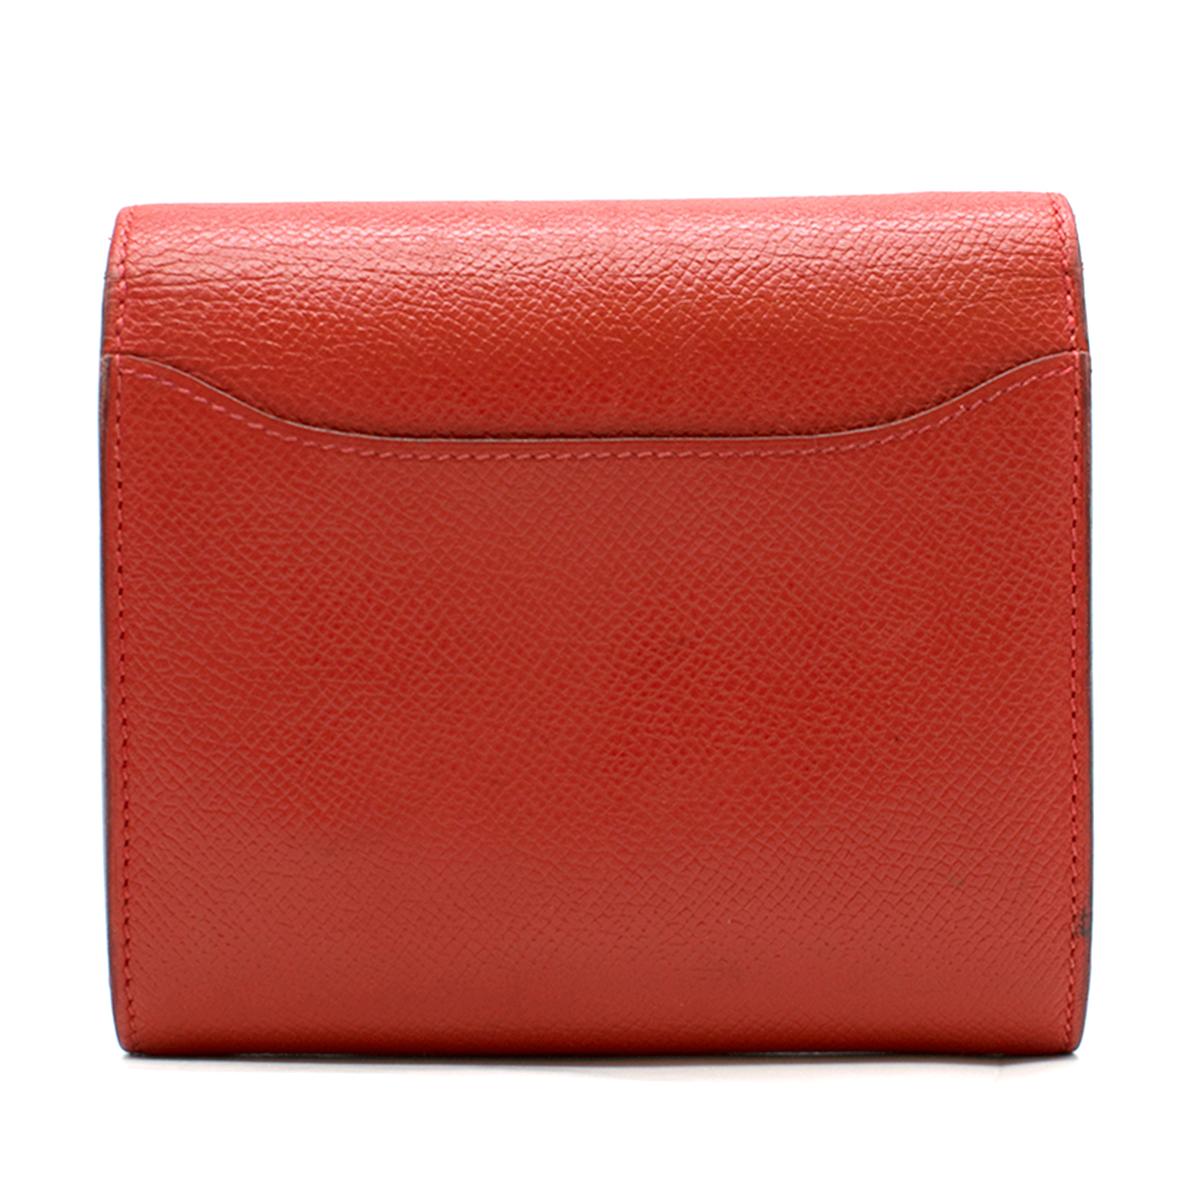 Hermes Constance Compact Rouge Epsom Wallet

-Circa: 2014
-Red compact constance wallet
-Palladium hardware
-'H' clasp
-Two main interior pockets with one zipped pocket
-Features five slots

Please note, these items are pre-owned and may show signs